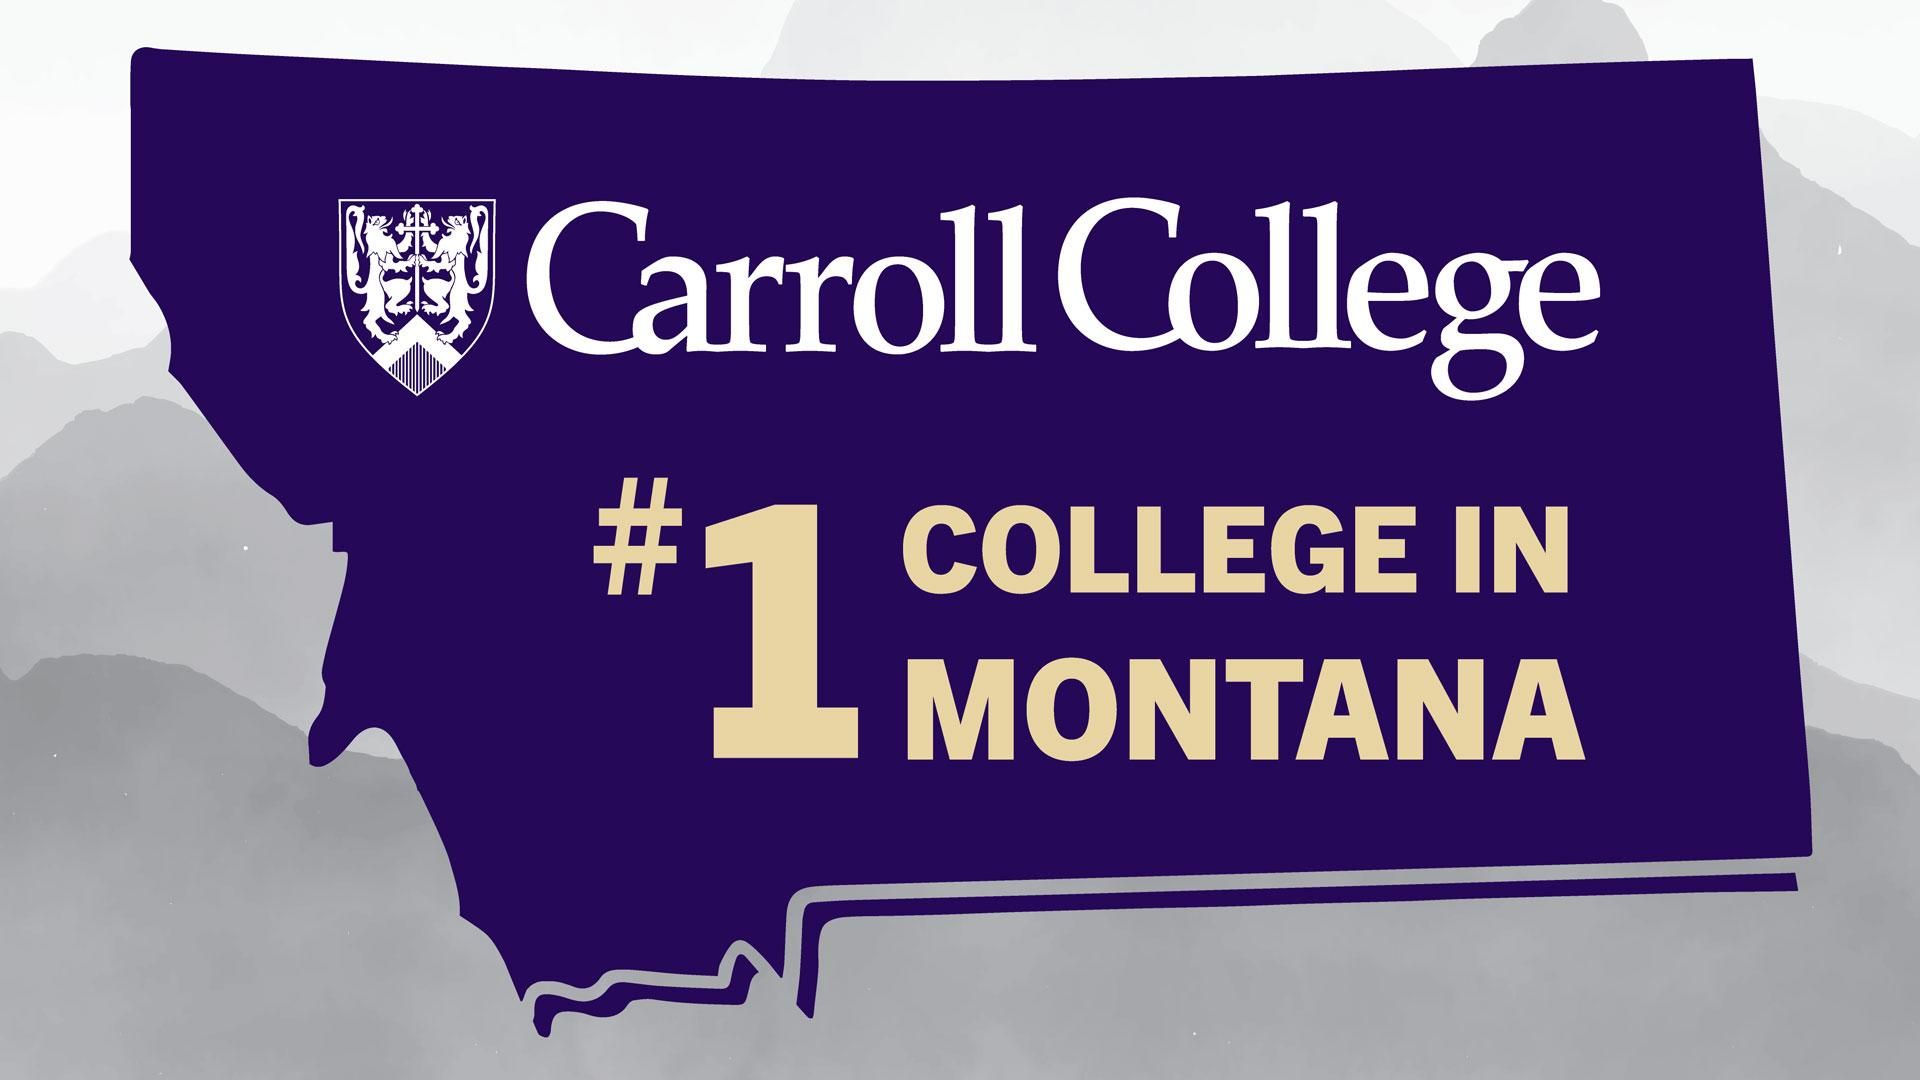 Carroll College - #1 College in Montana